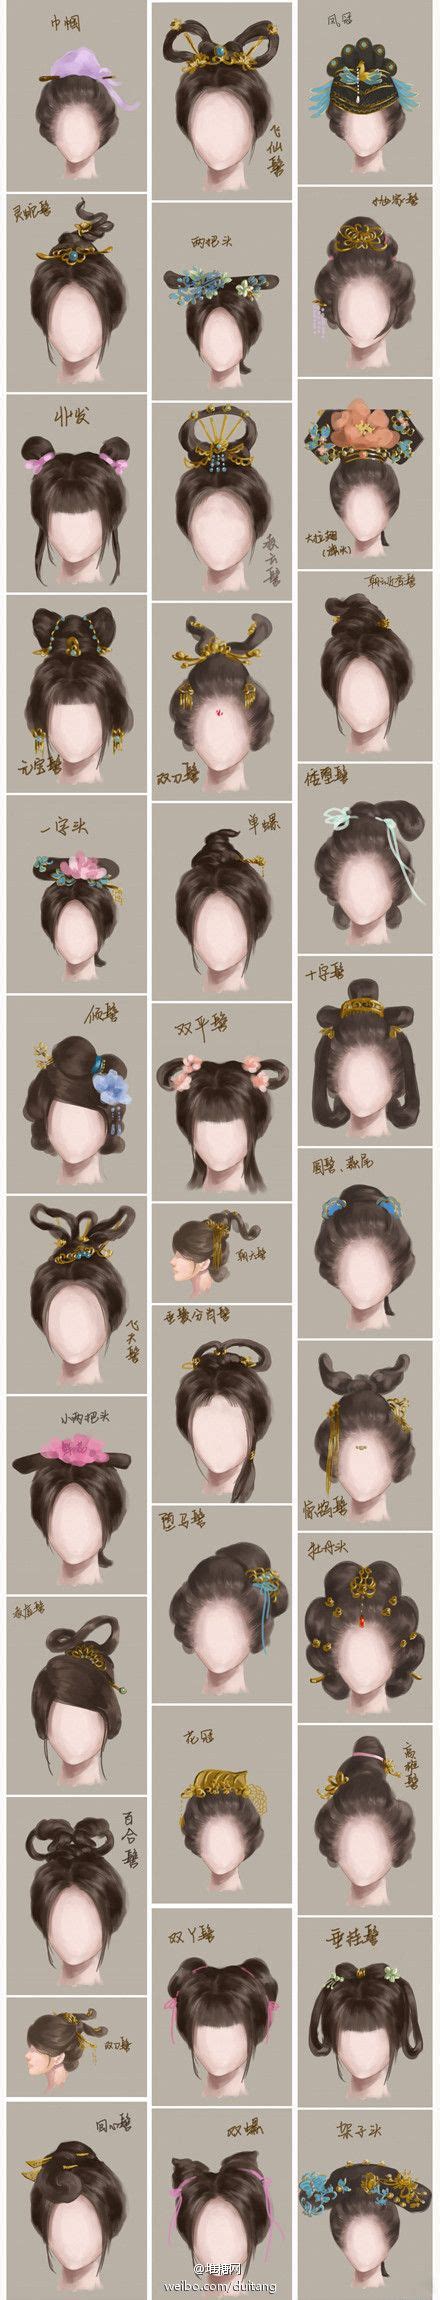 For the men hairstyle, it's already been answered. chinese ancient hairstyles | Asia | Pinterest